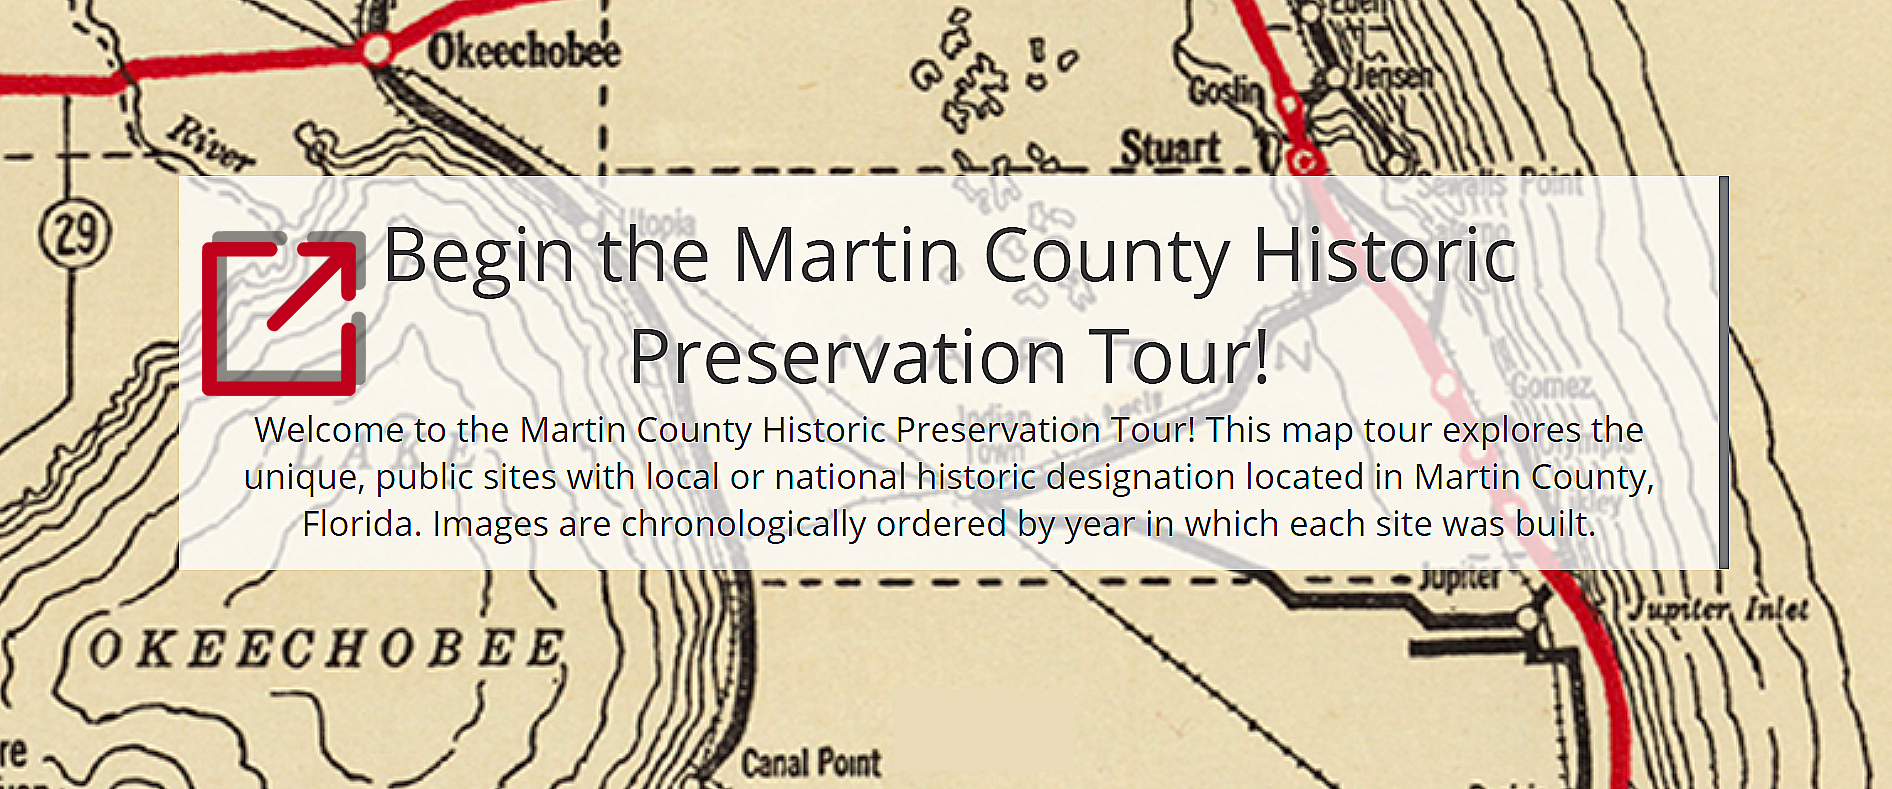 Martin County Historic Preservation Map